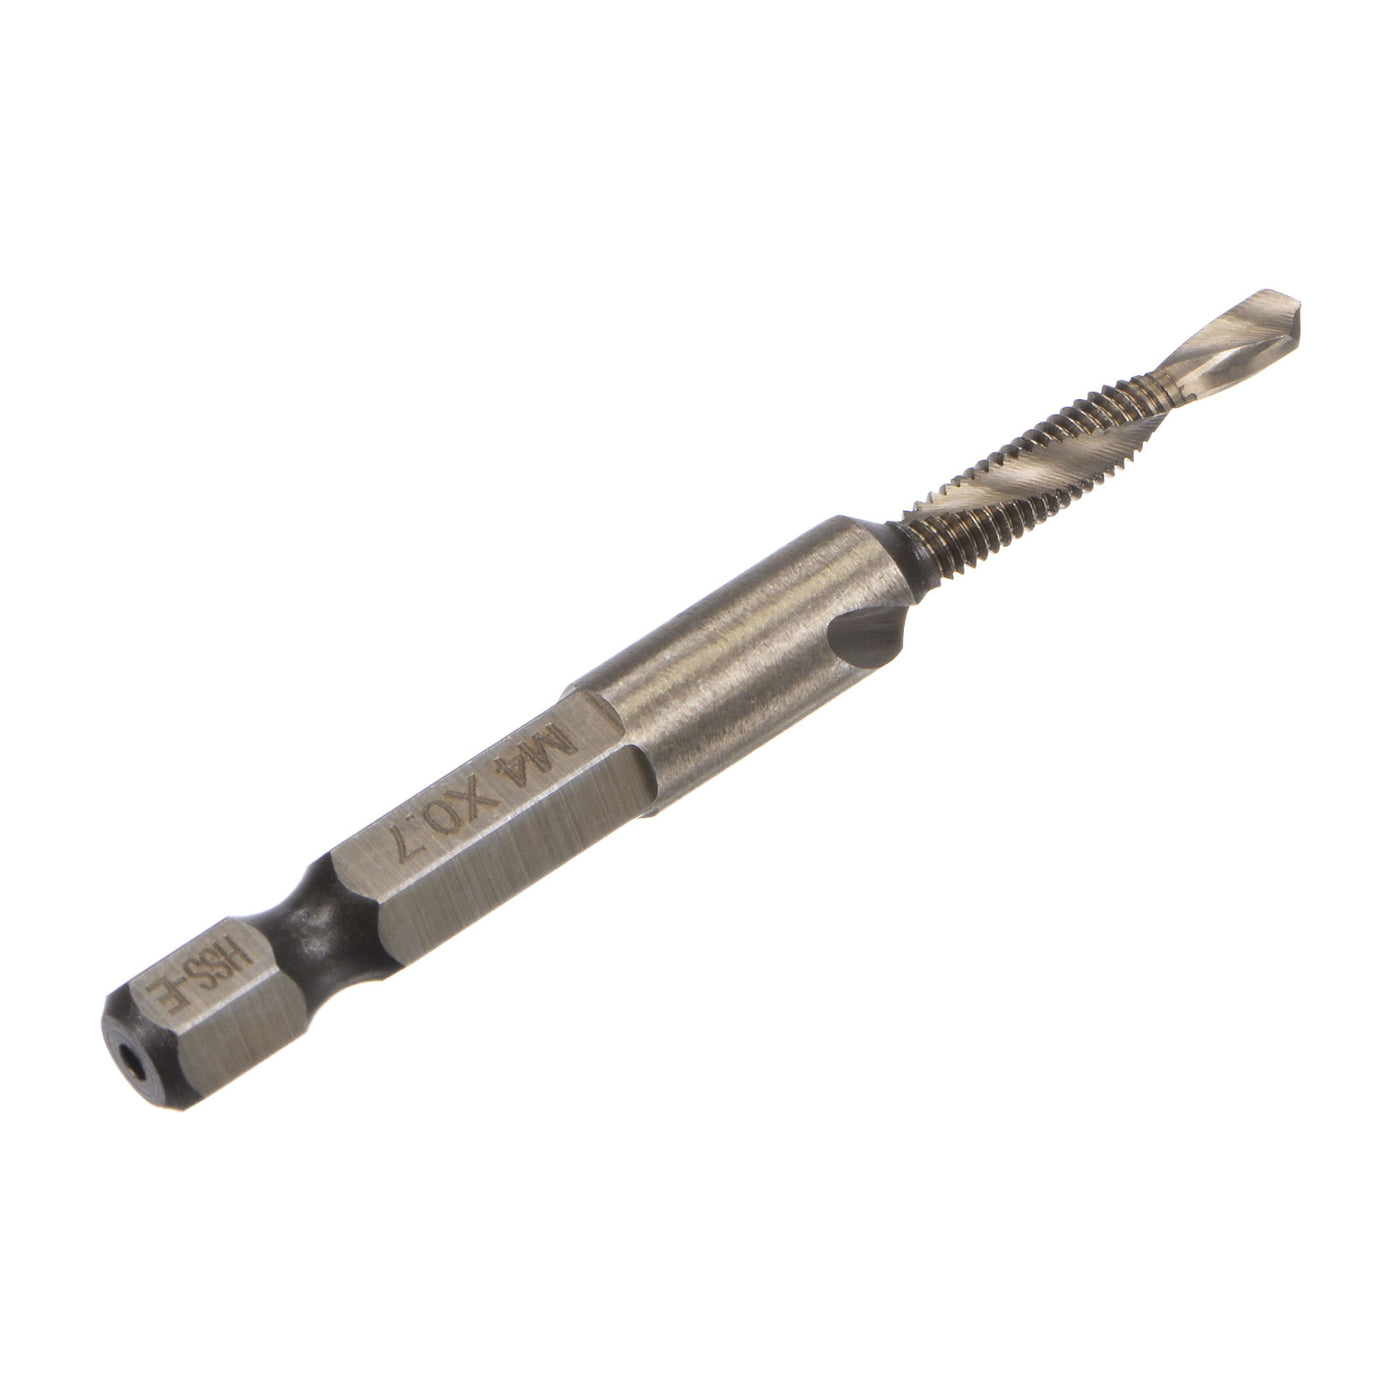 Uxcell Uxcell M10 x 1.5 Titanium Coated High Speed Steel 6542 Combination Drill Tap Bit